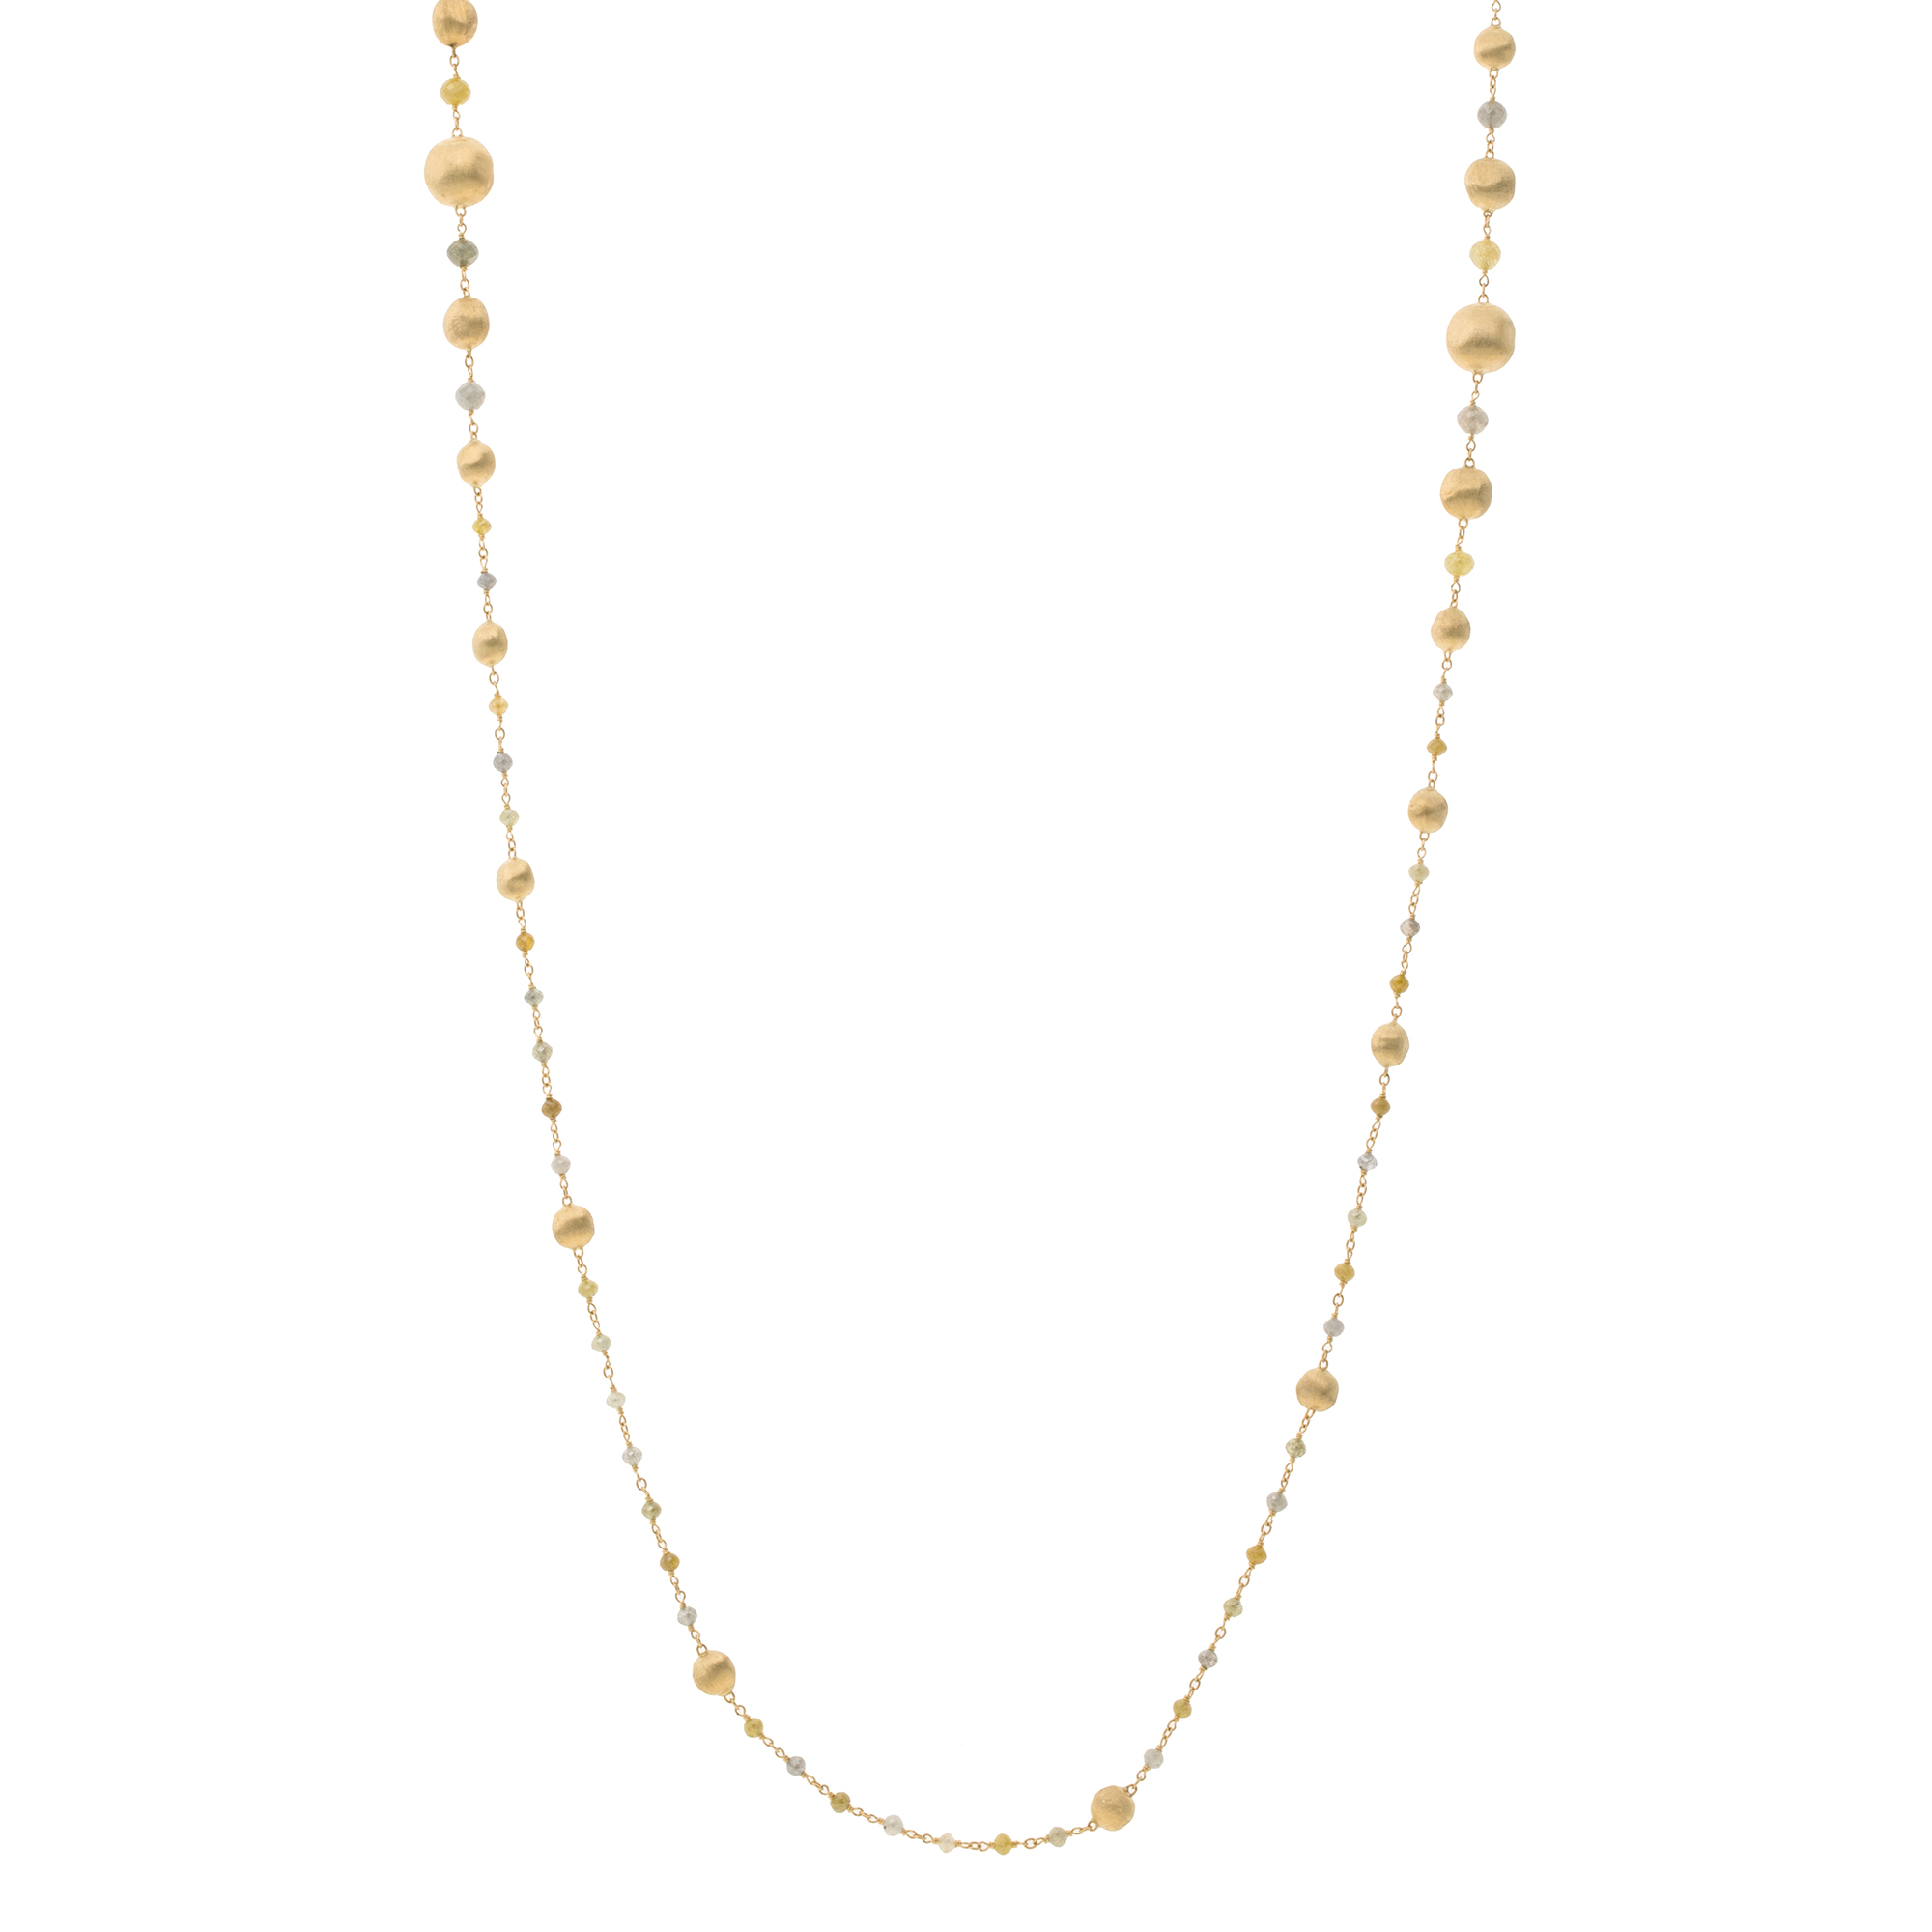 Marco Bicego 18K Yellow Gold Africa Diamond Necklace, 39.25